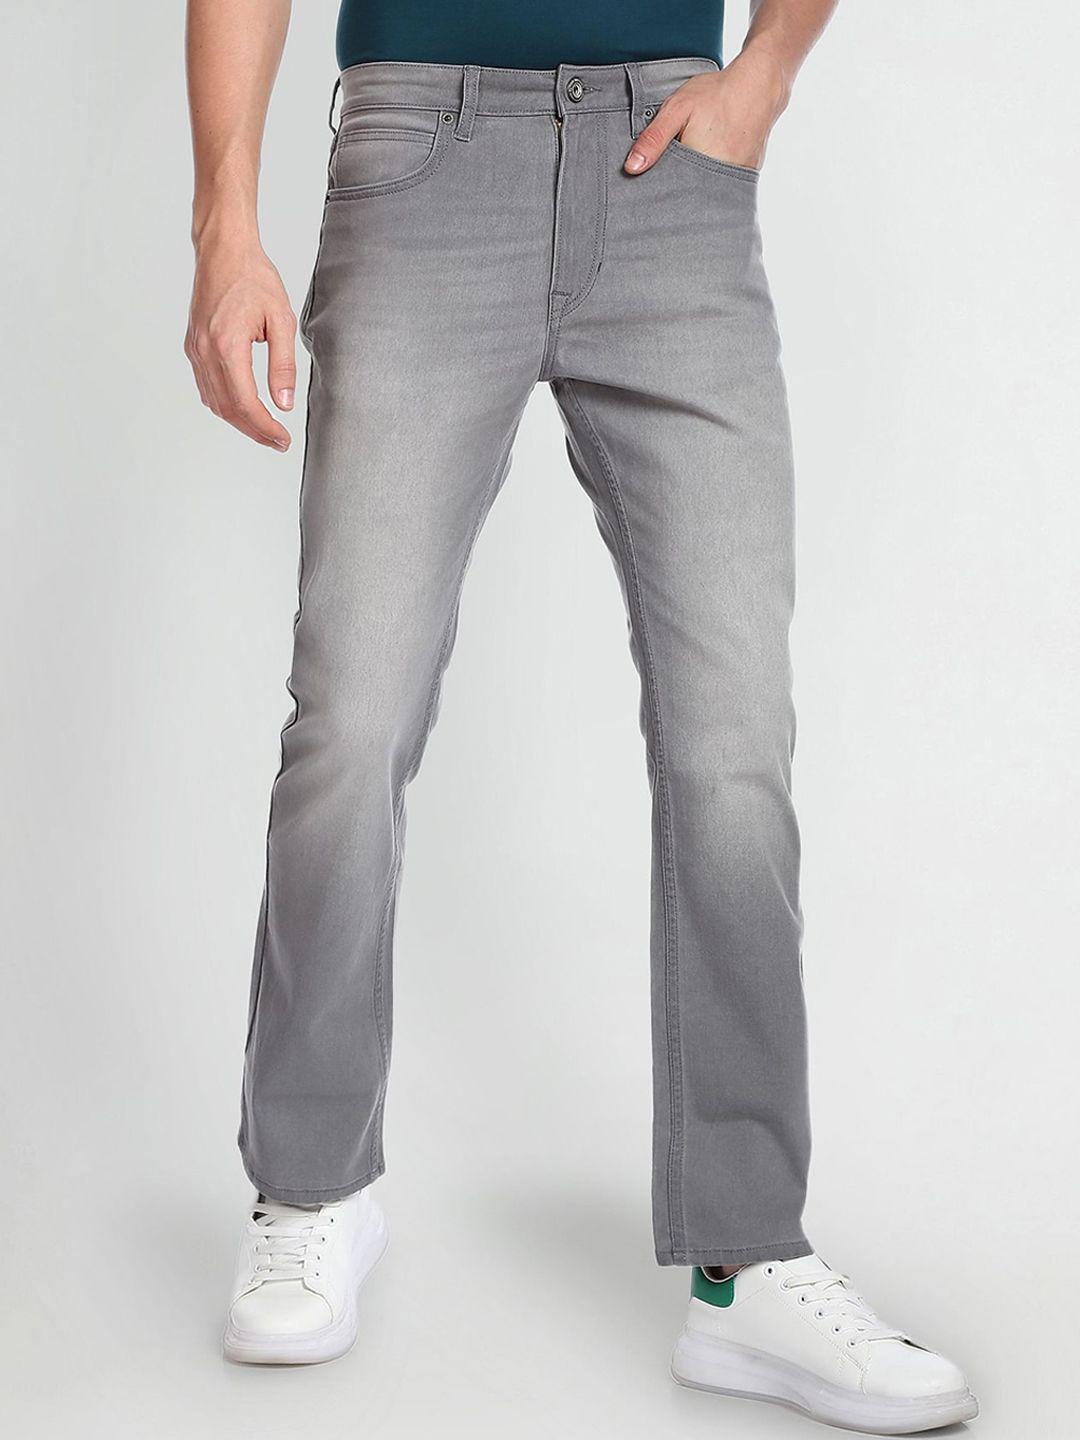 flying machine men mid-rise light fade bootcut jeans